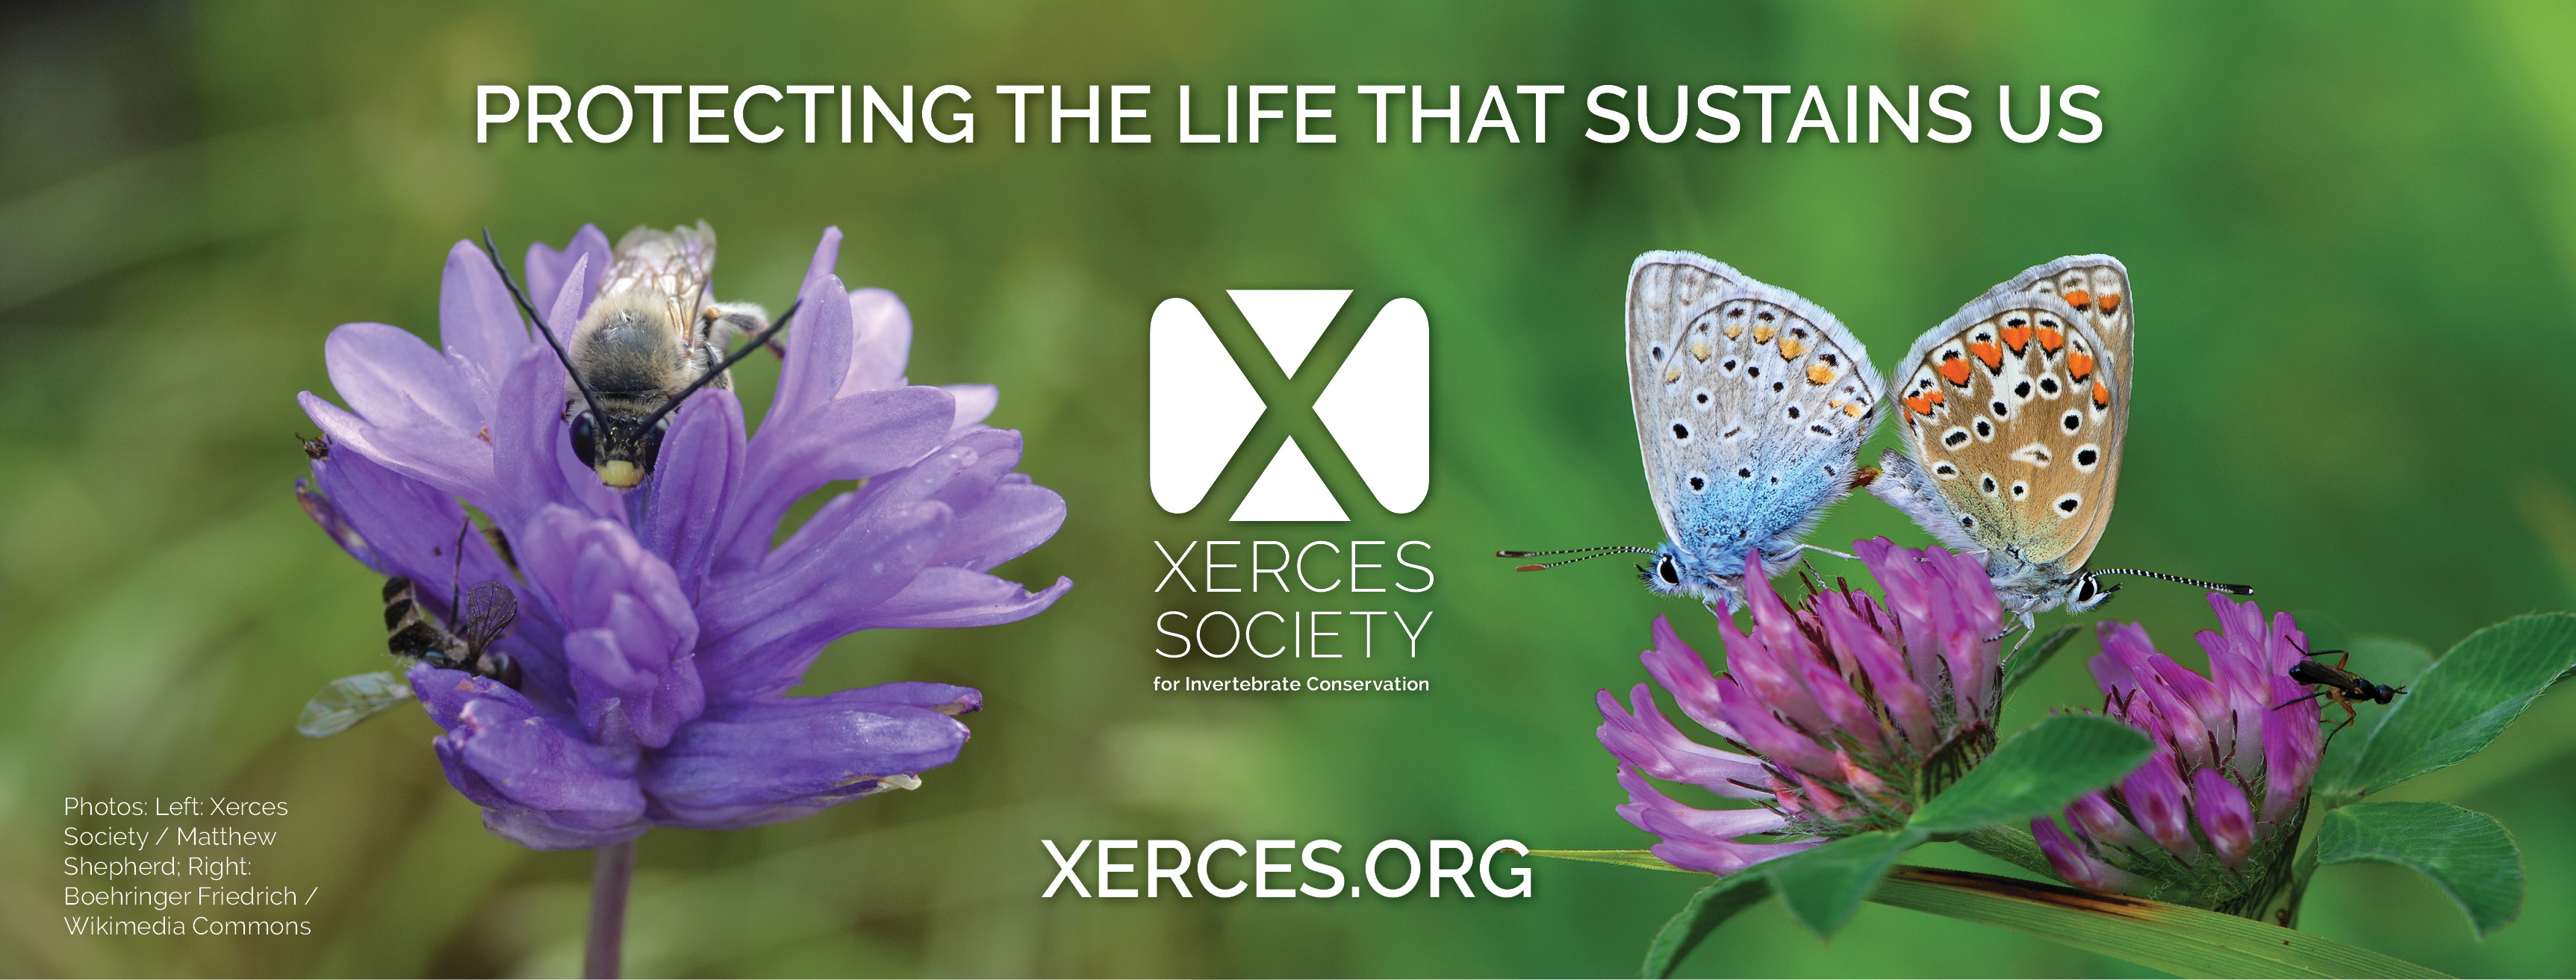 A collaged image with bees and butterflies, the Xerces Society logo, and the text "protecting the life that sustains us."